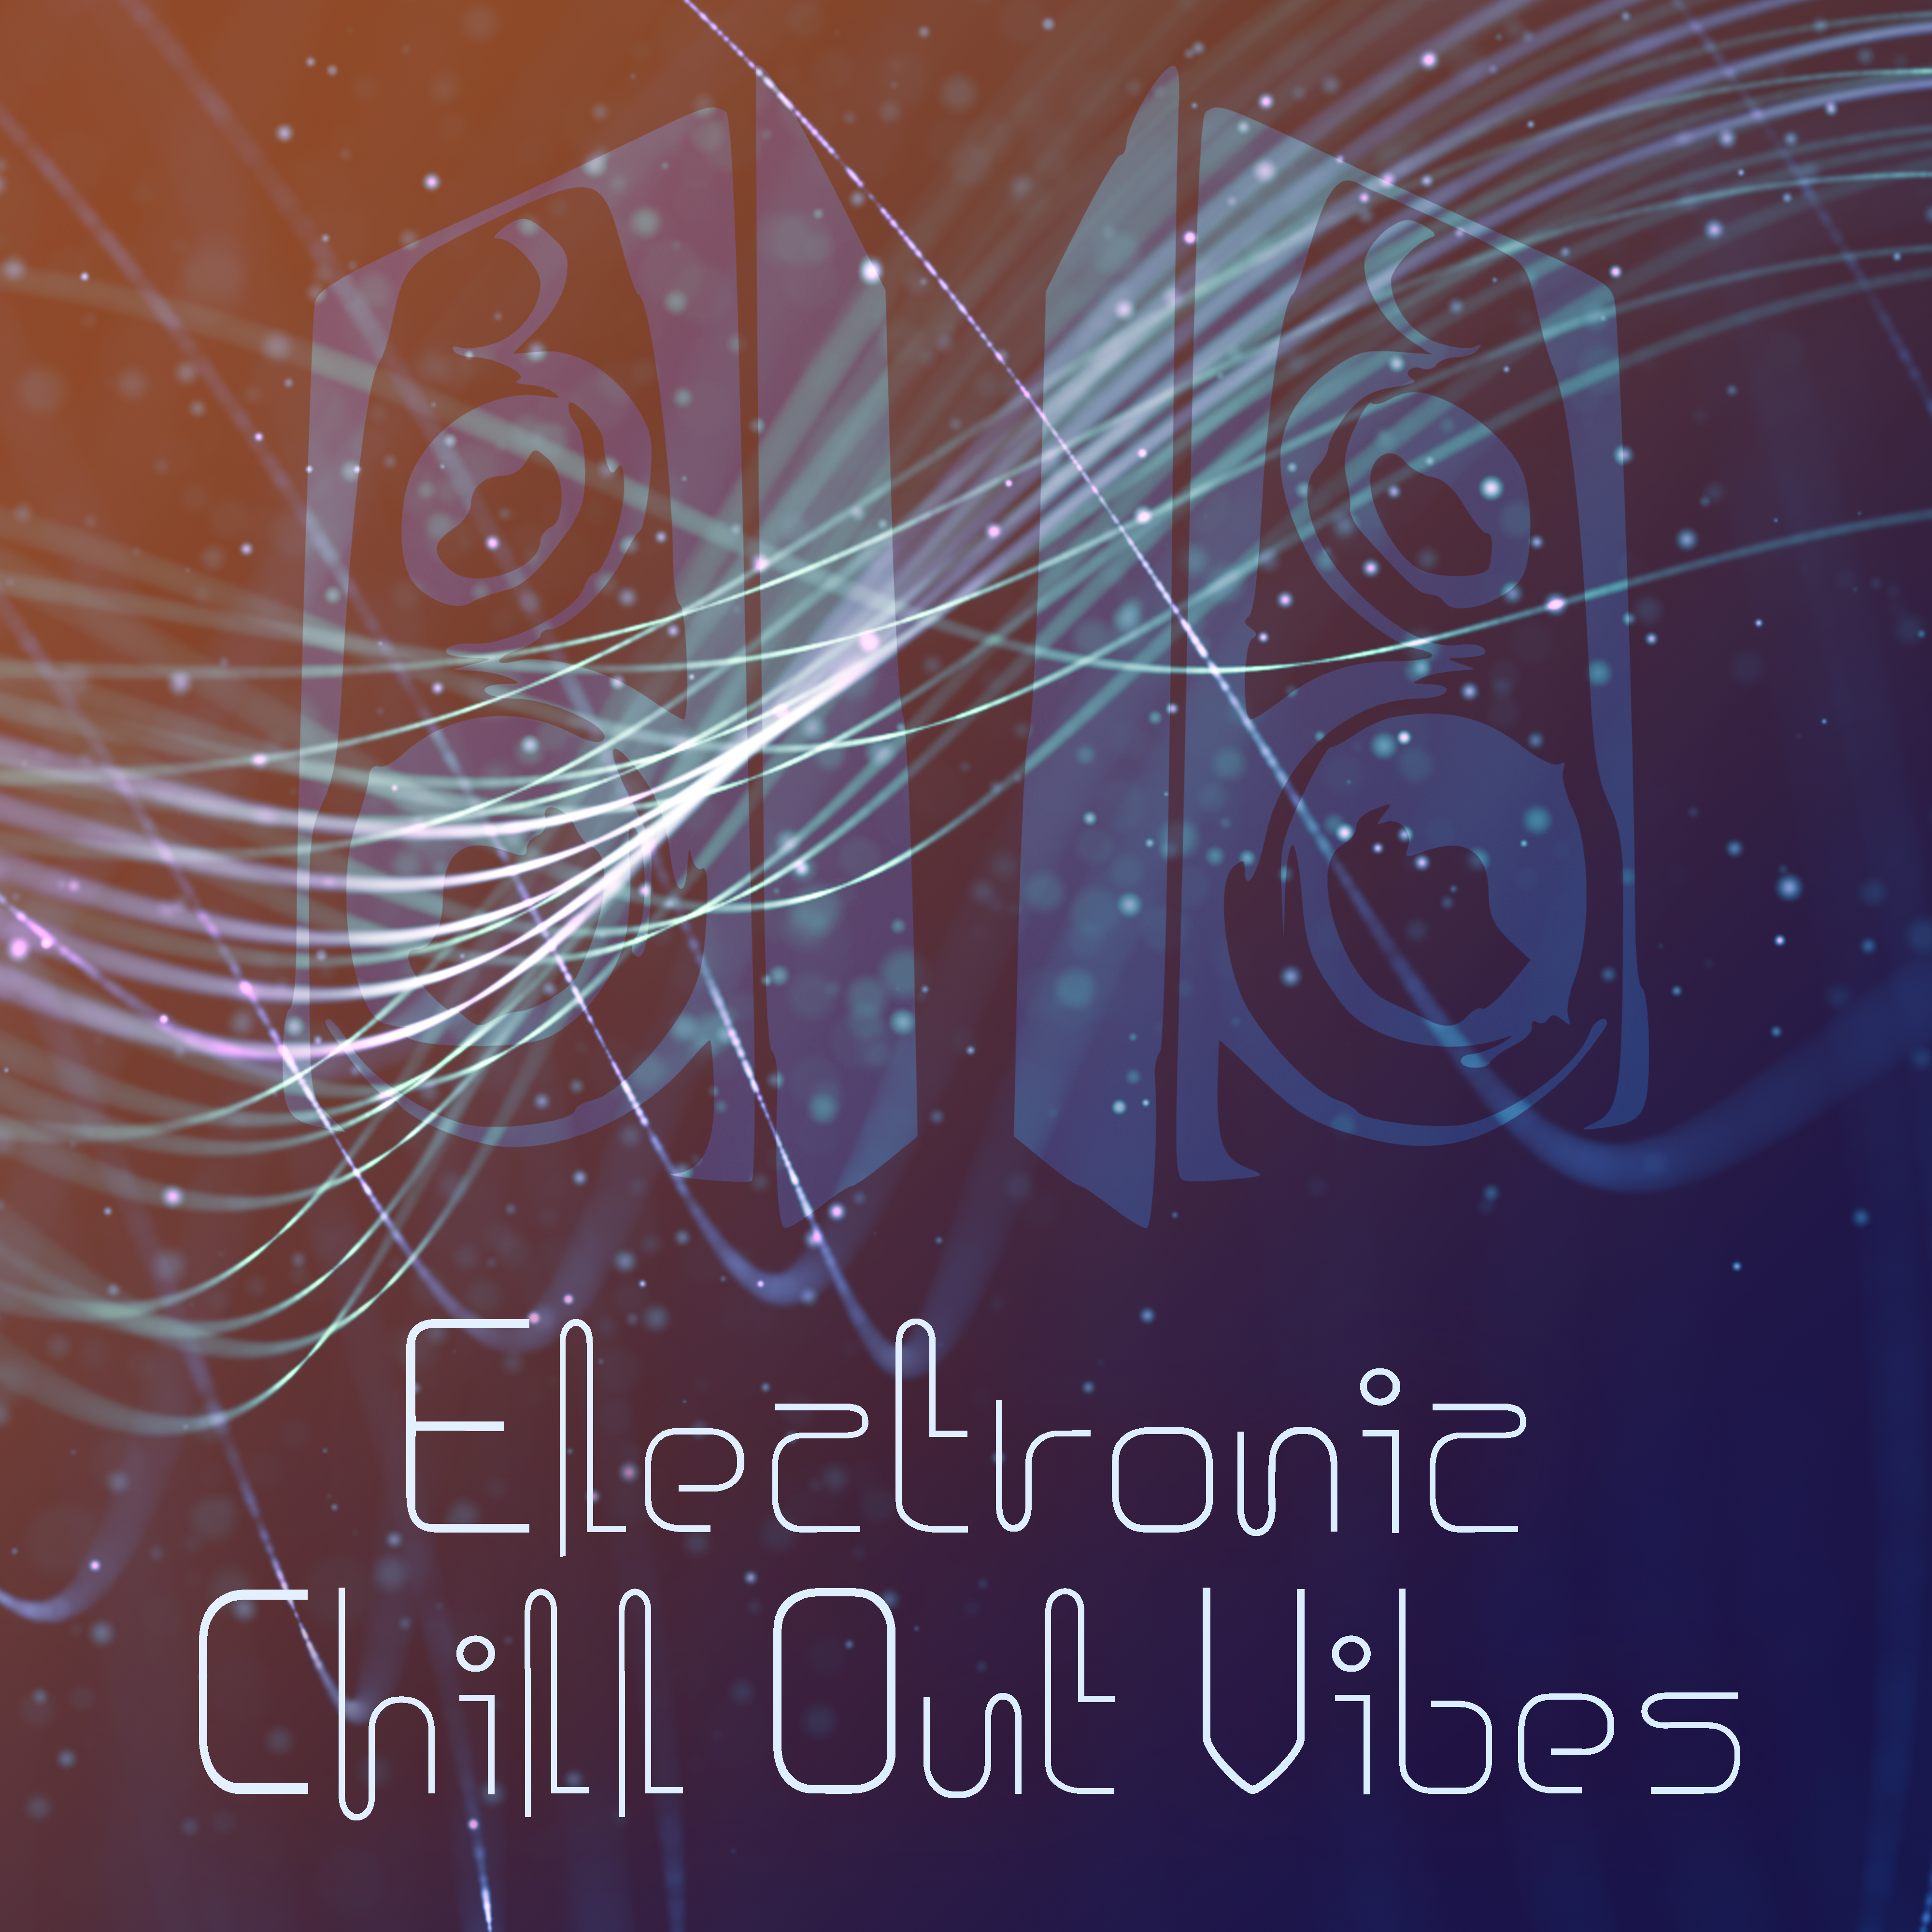 Electronic Chill Out Vibes – Summer Beats, Ibiza Vibes, Holiday 2017, Chill Out Music, Beach Melodies